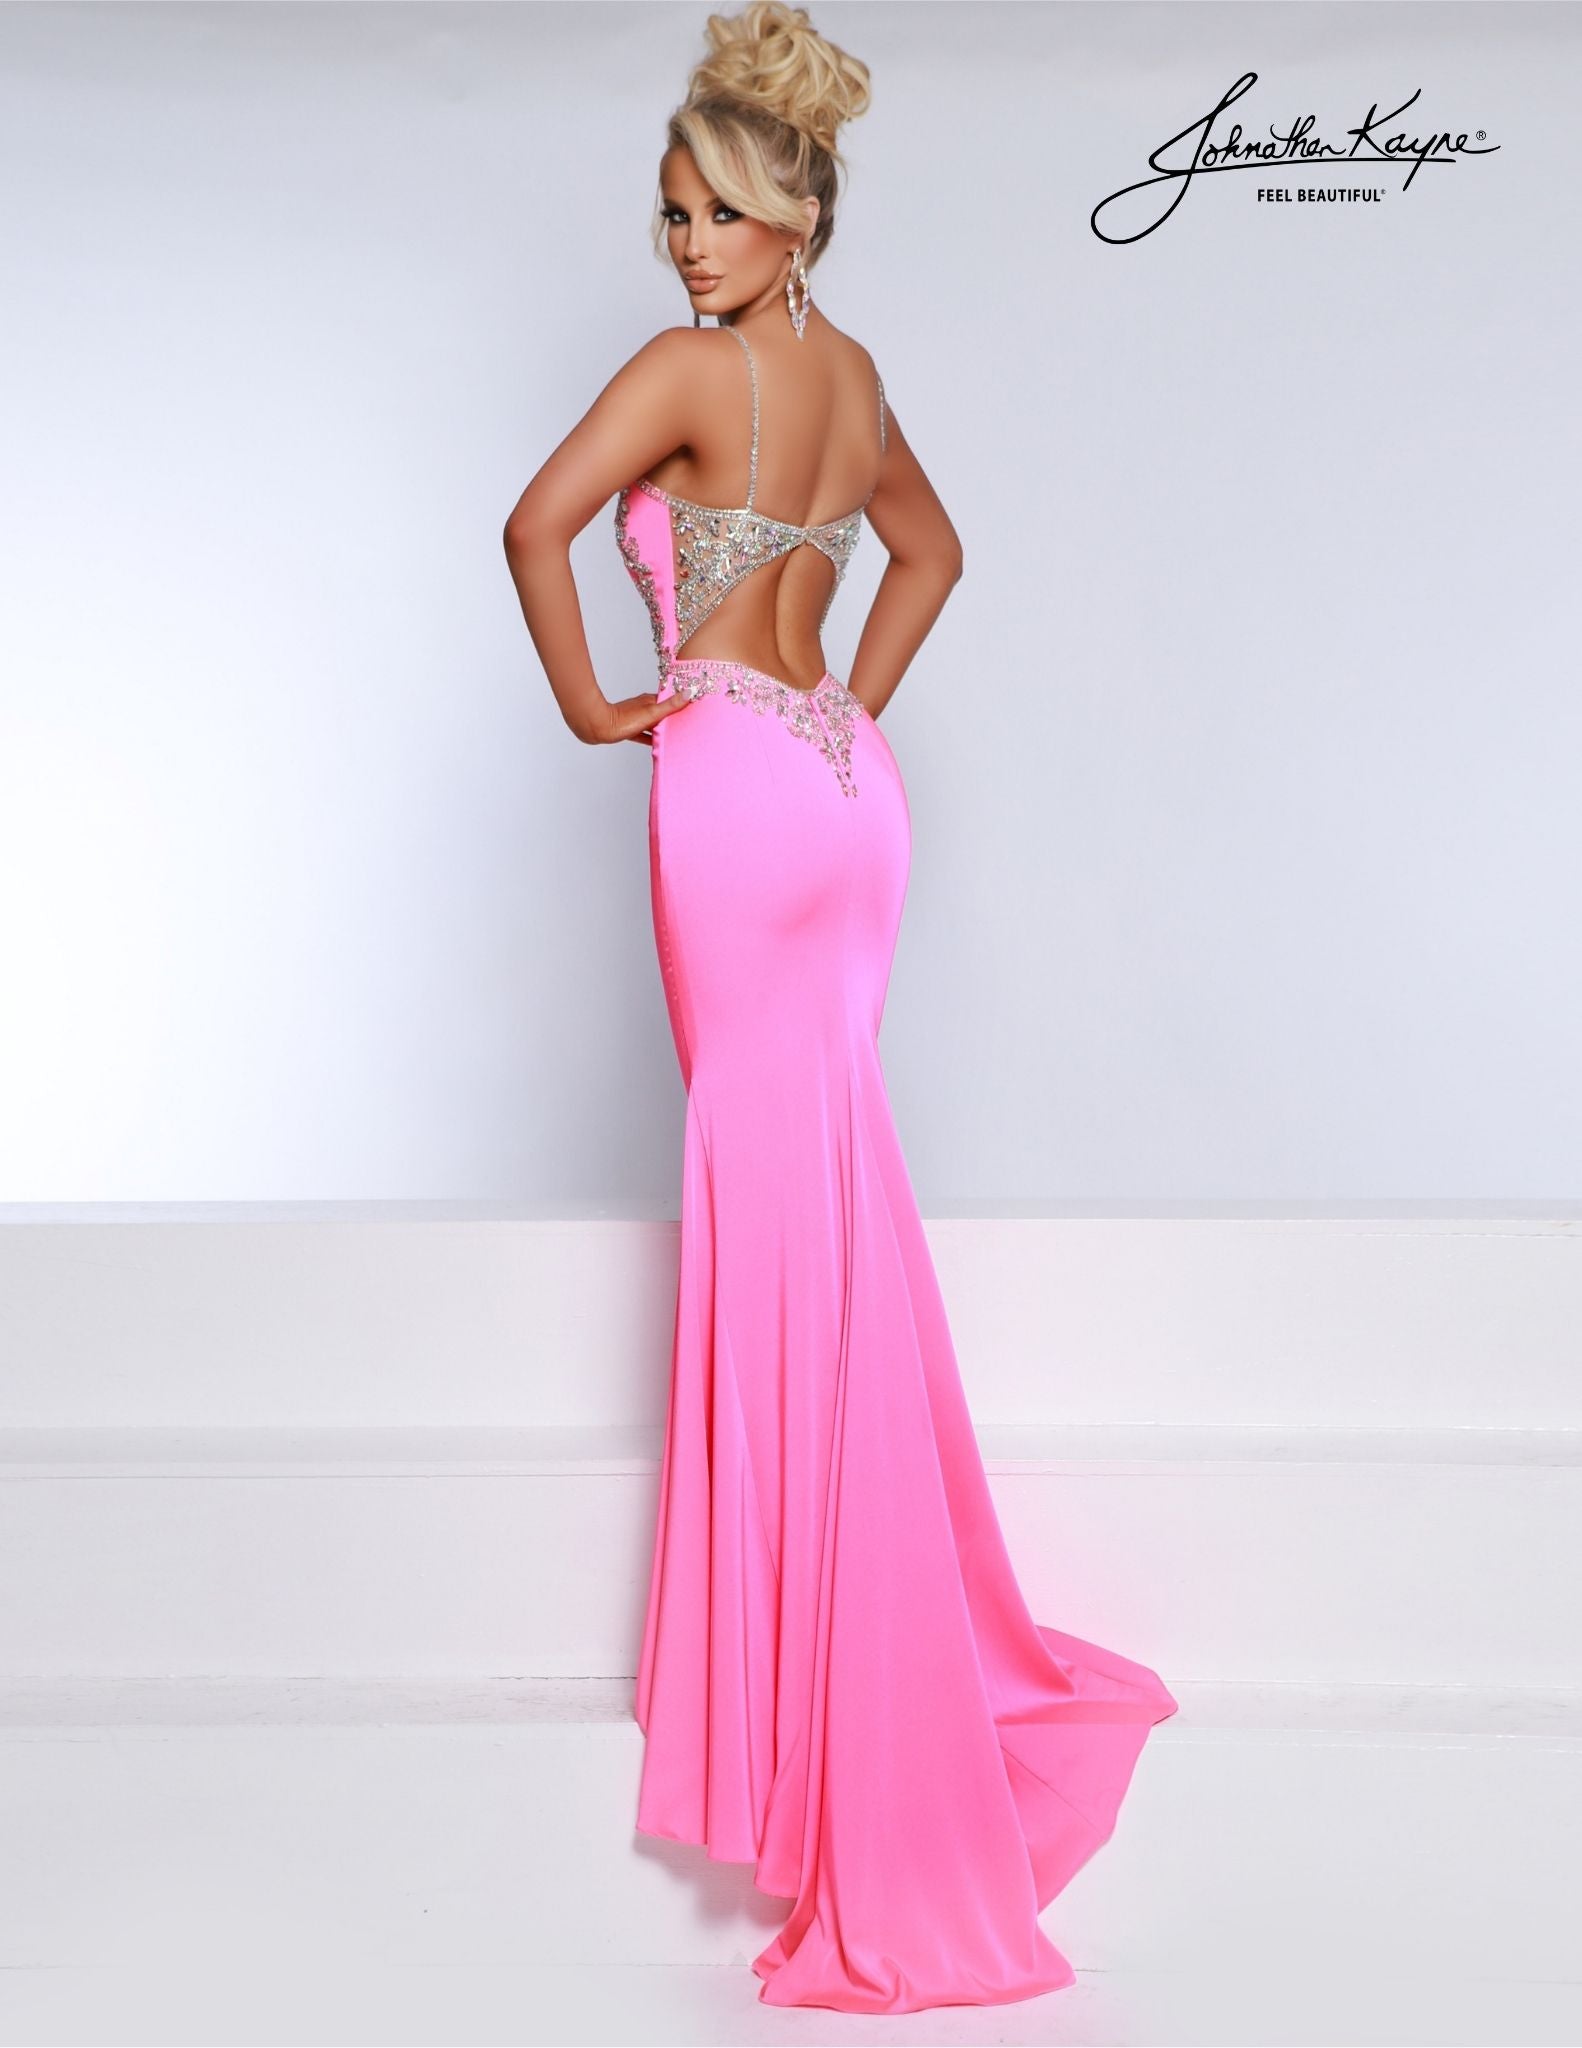 This Johnathan Kayne 2918 prom dress exudes elegance with its sheer backless design and intricate crystal embellishments. Made with high-quality crepe, this gown is perfect for formal events and pageants. Convey a sophisticated and luxurious look while feeling comfortable and confident. Embrace perfection in this stretch crepe gown. The sophisticated high-neckline alludes elegance while the fit and flare silhouette hugs all the curves in all the right places.  Sizes: 00-16  Colors: Taffy Pink, Black, White